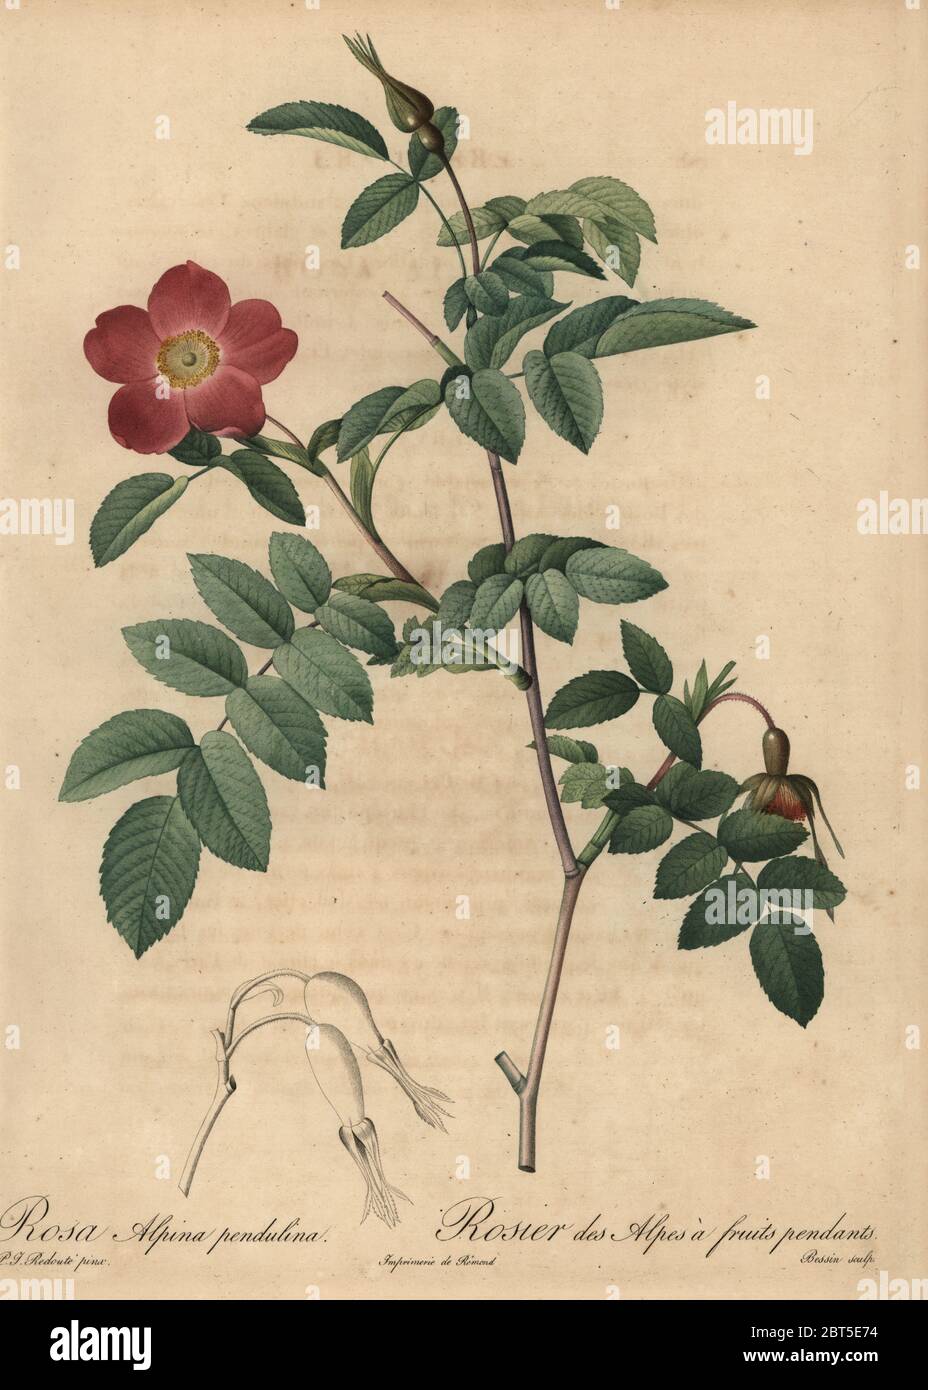 Scarlet alpine rose, Rosa pendulina. Rosa alpina pendulina, Rosier des Alpes a fruits pendants. Stipple copperplate engraving by Rosine-Antoinette Bessin handcoloured a la poupee after a botanical illustration by Pierre-Joseph Redoute from the first folio edition of Les Roses, Firmin Didot, Paris, 1817. Stock Photo